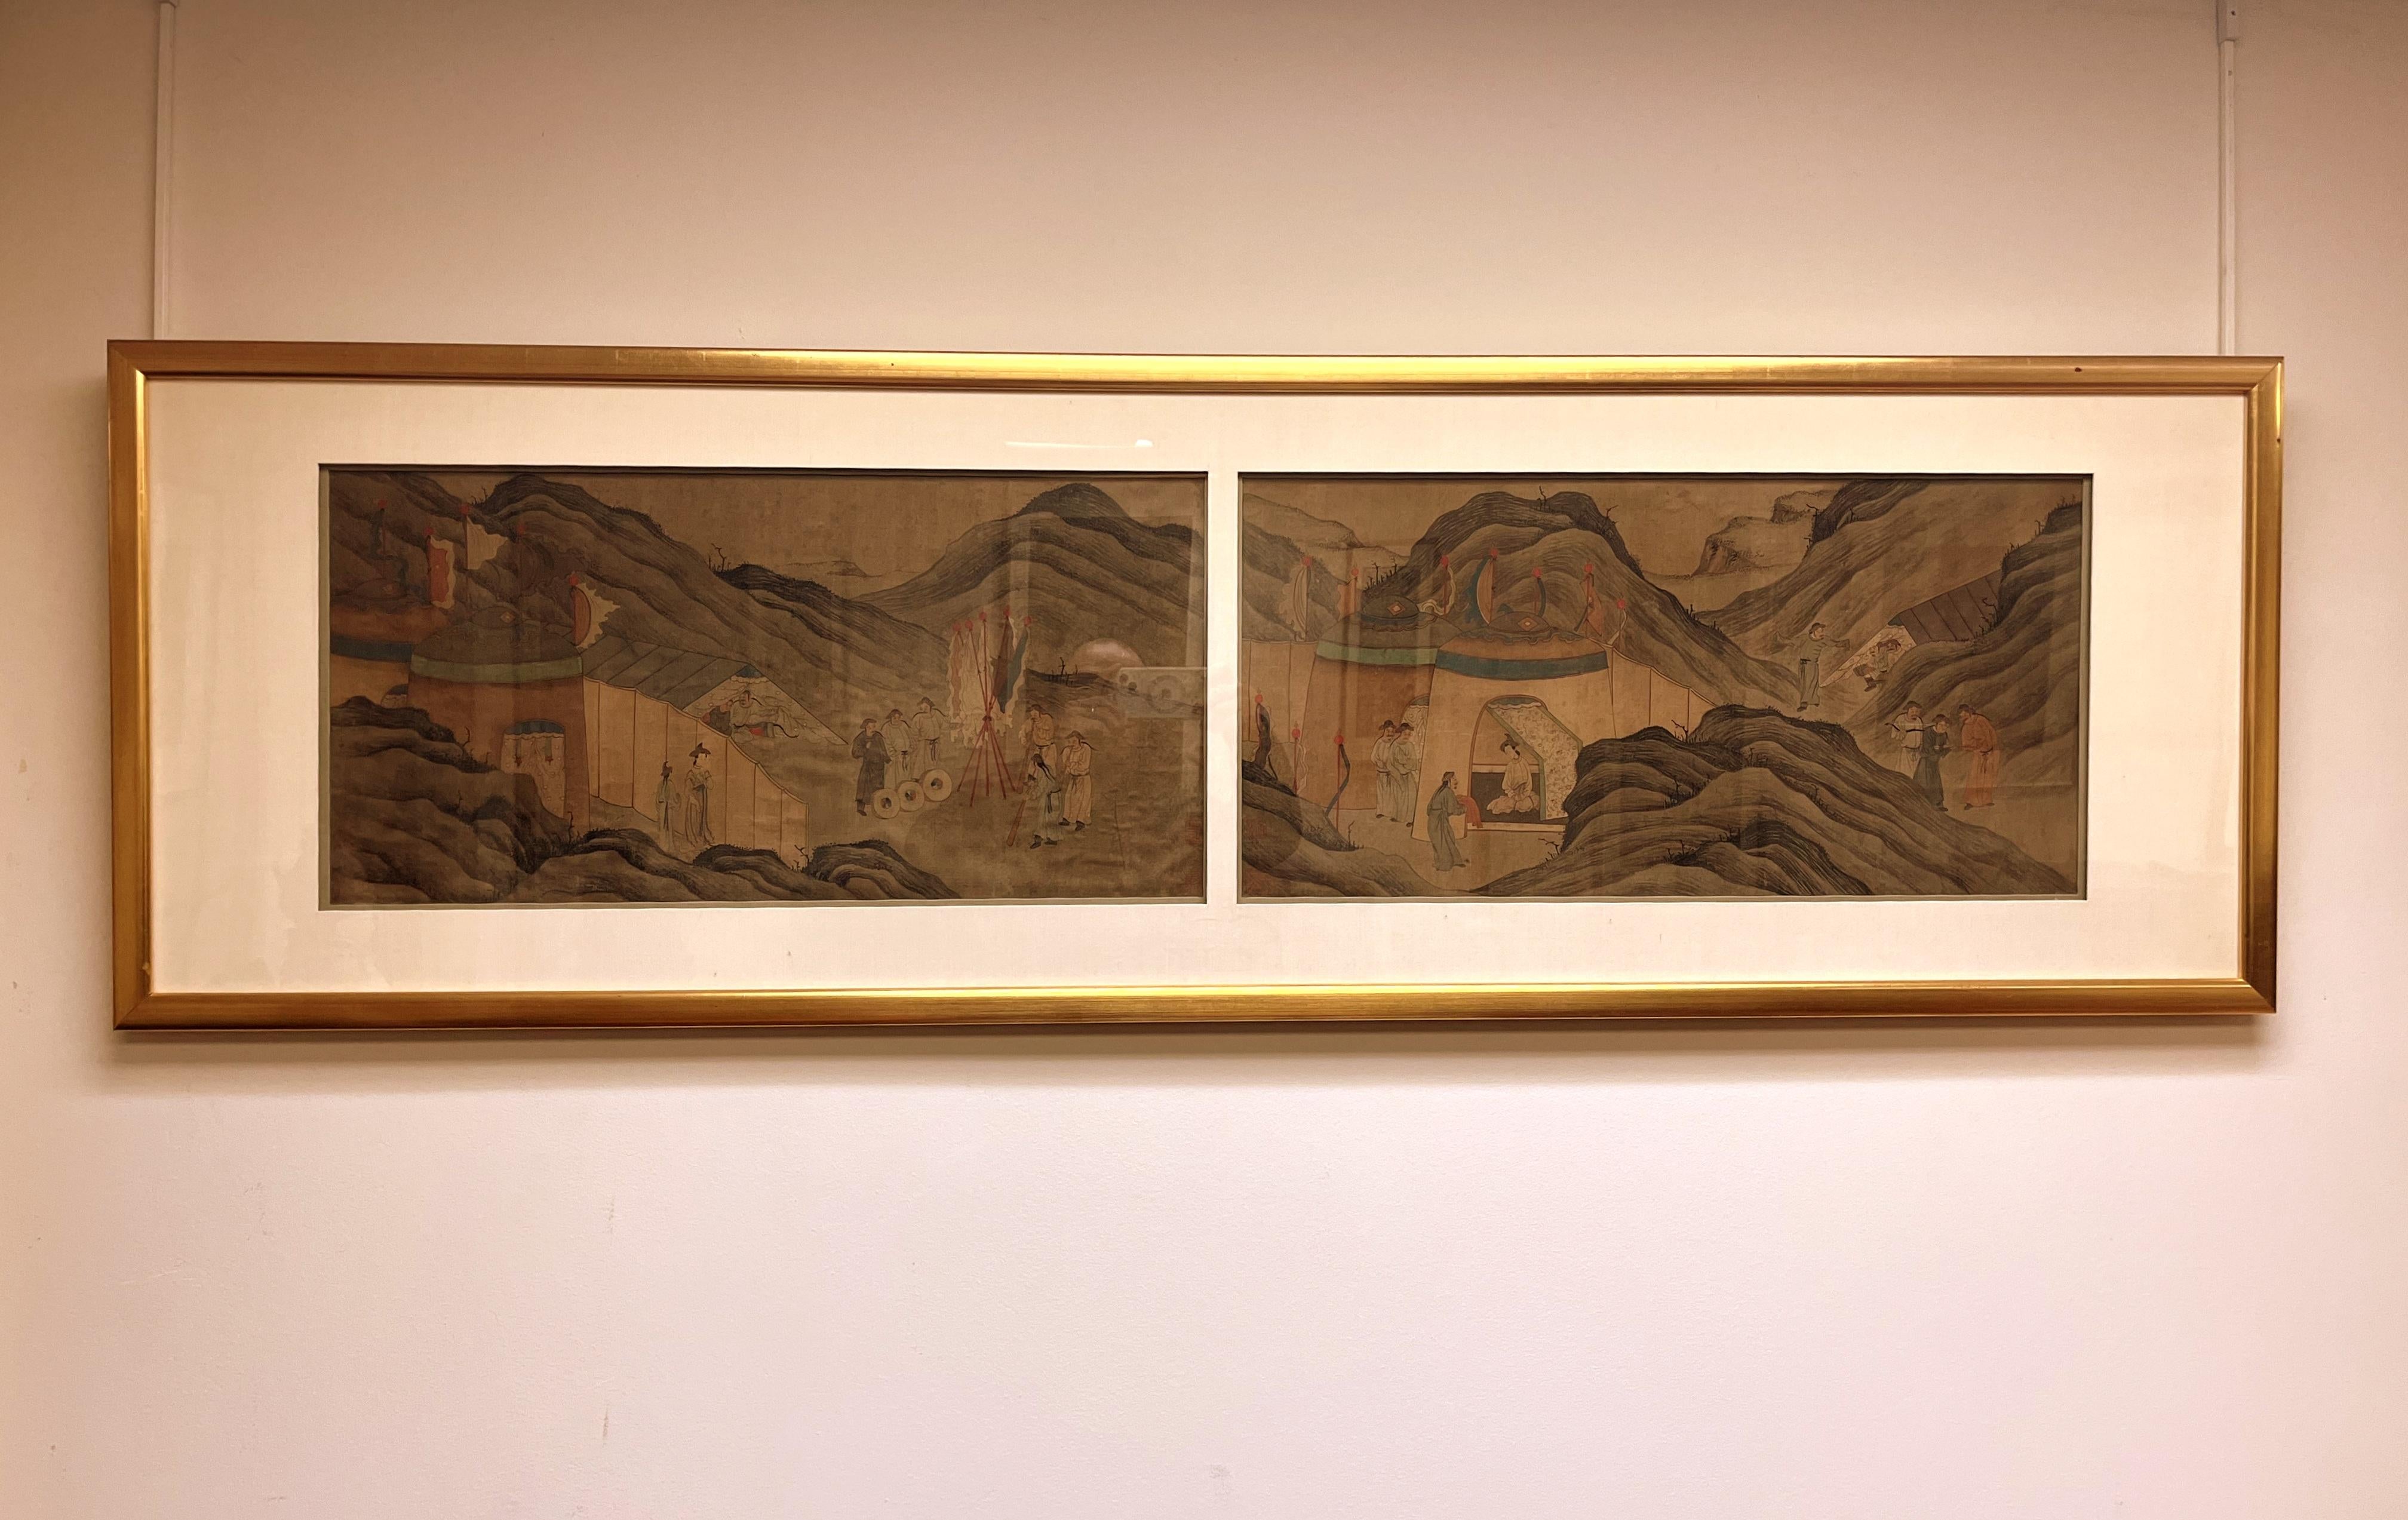 Framed Pair of Chinese Paintings of Northern Asian Nomadic Ethnic Group Livings 
Depicted Northern Asian nomadic people daily life and living in the tents of the great plain in northern Asia.  
ink and color on silk, 19th century
One signature on